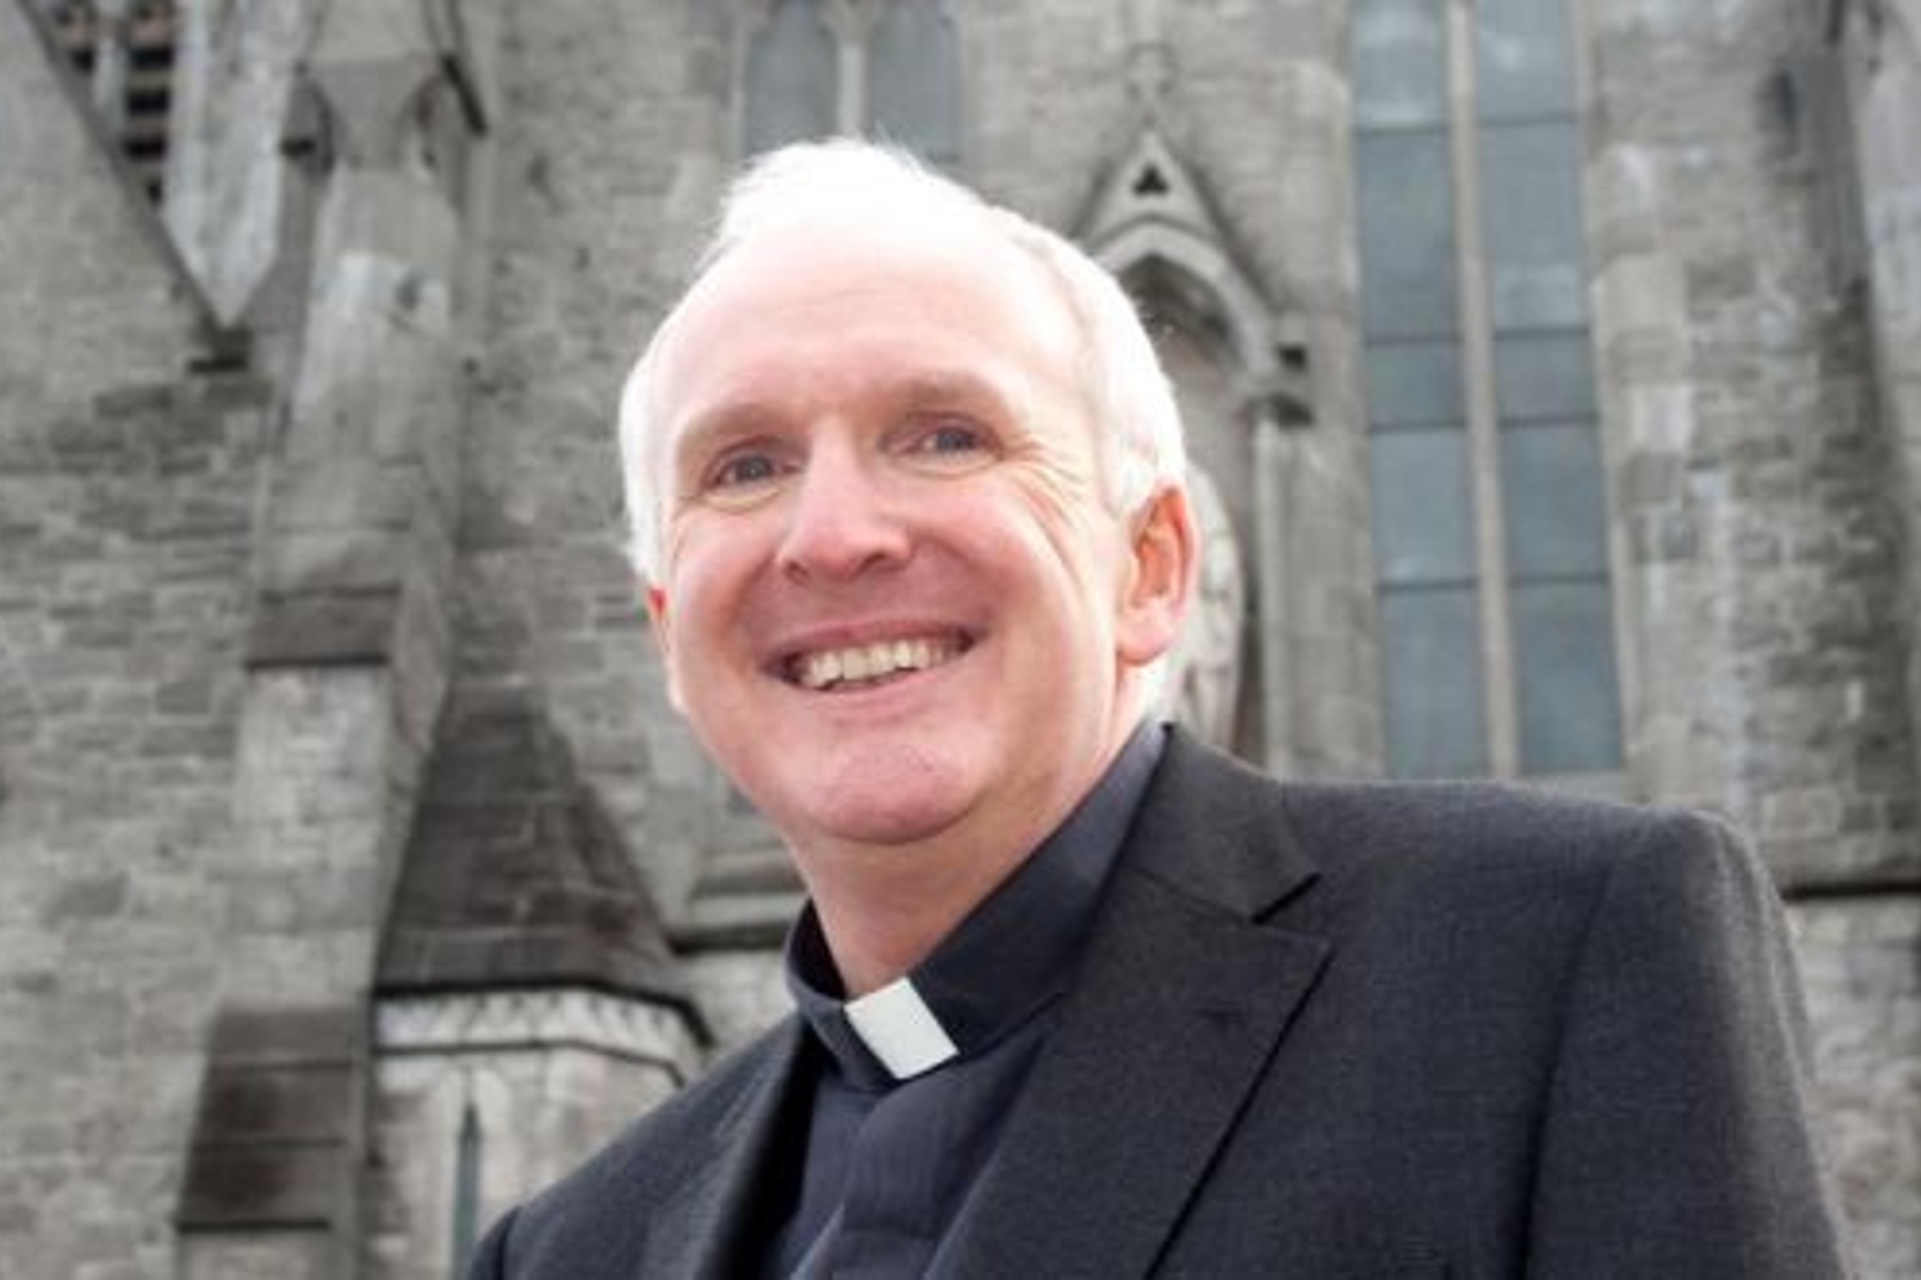 Limerick faithful set to join tomorrow in global 'Our Father' called for by Pope Francis